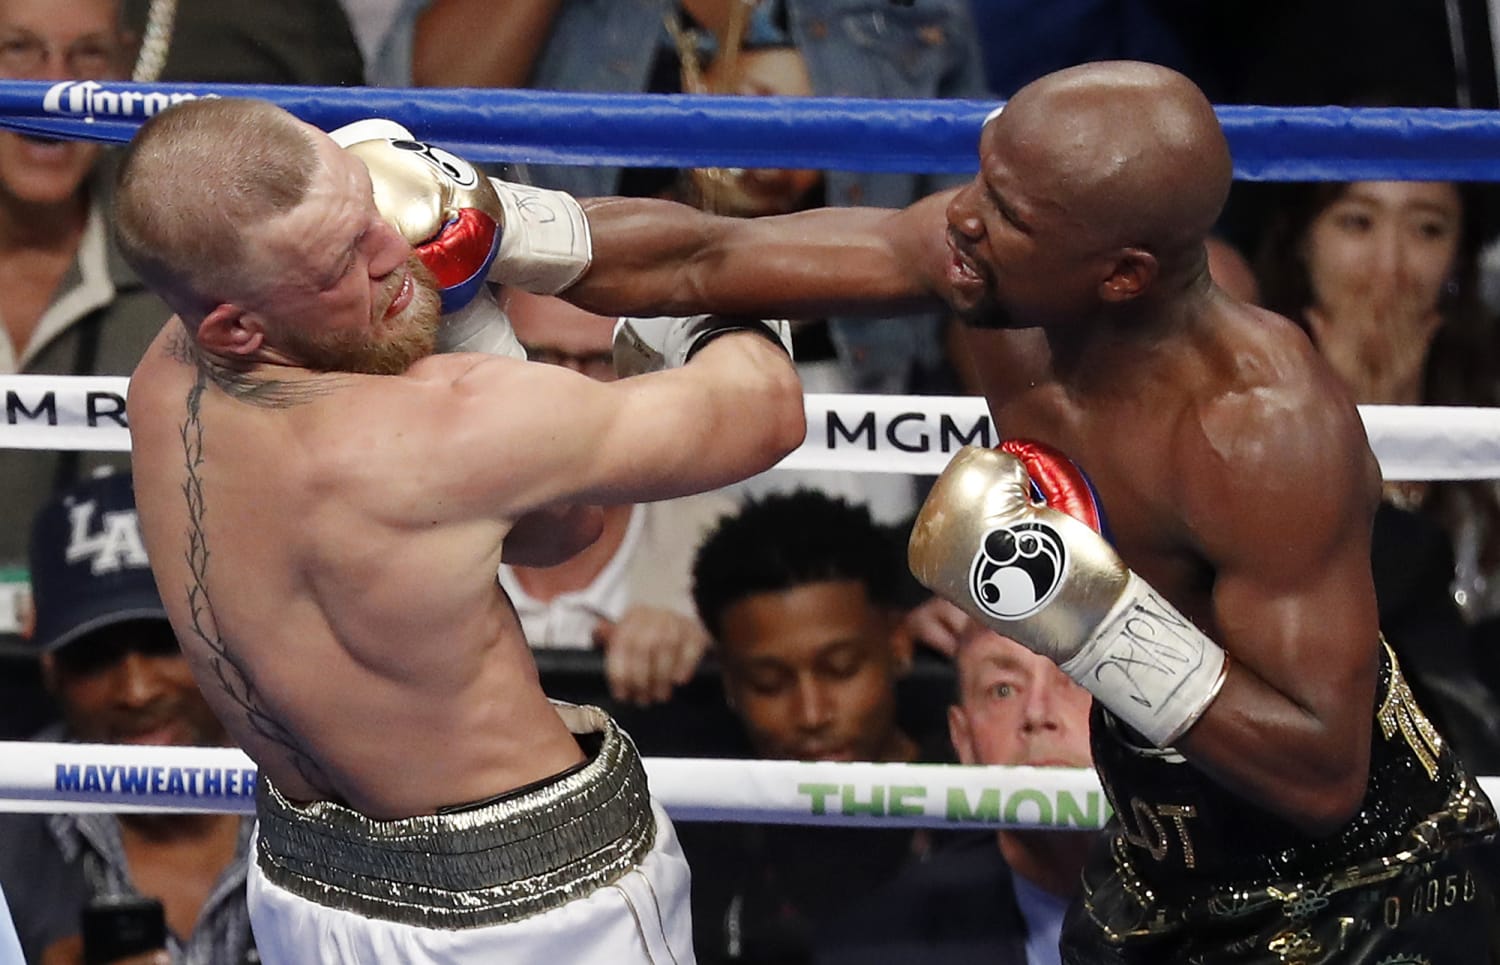 Mayweather Dominates Conor McGregor Late to Reach 50-0